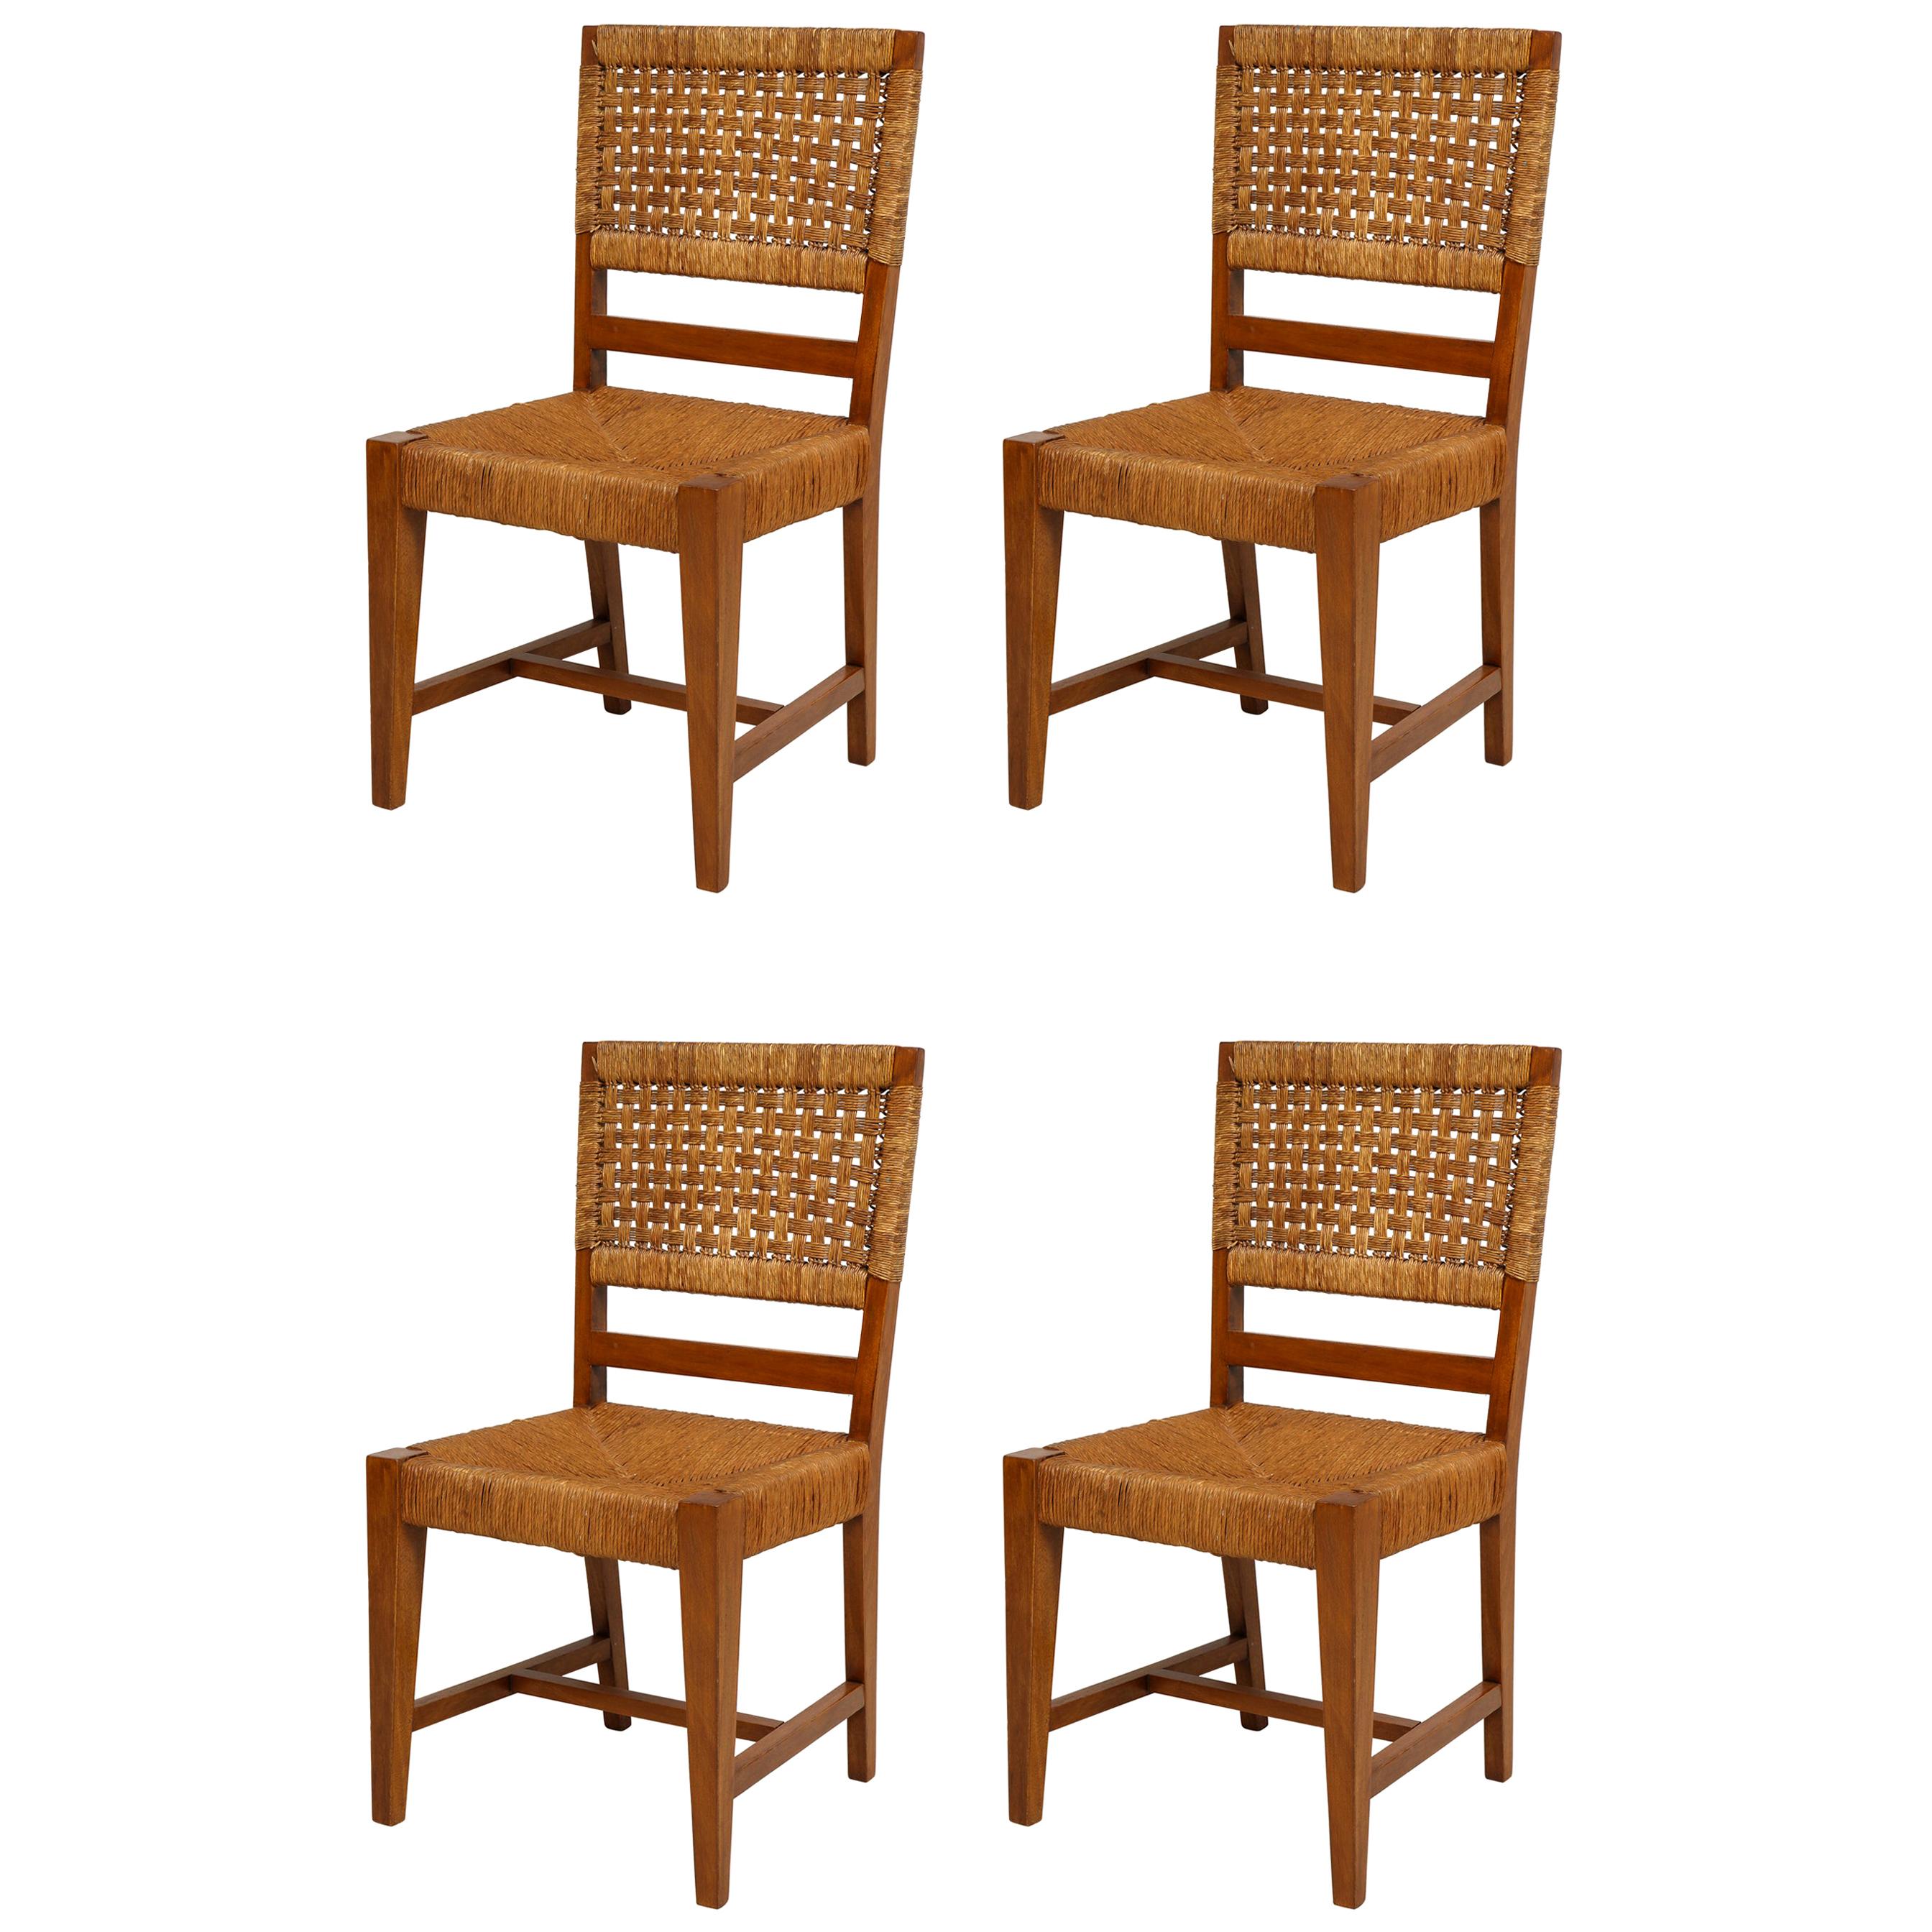 Set of Four French Caned Chairs from 1940s-1950s